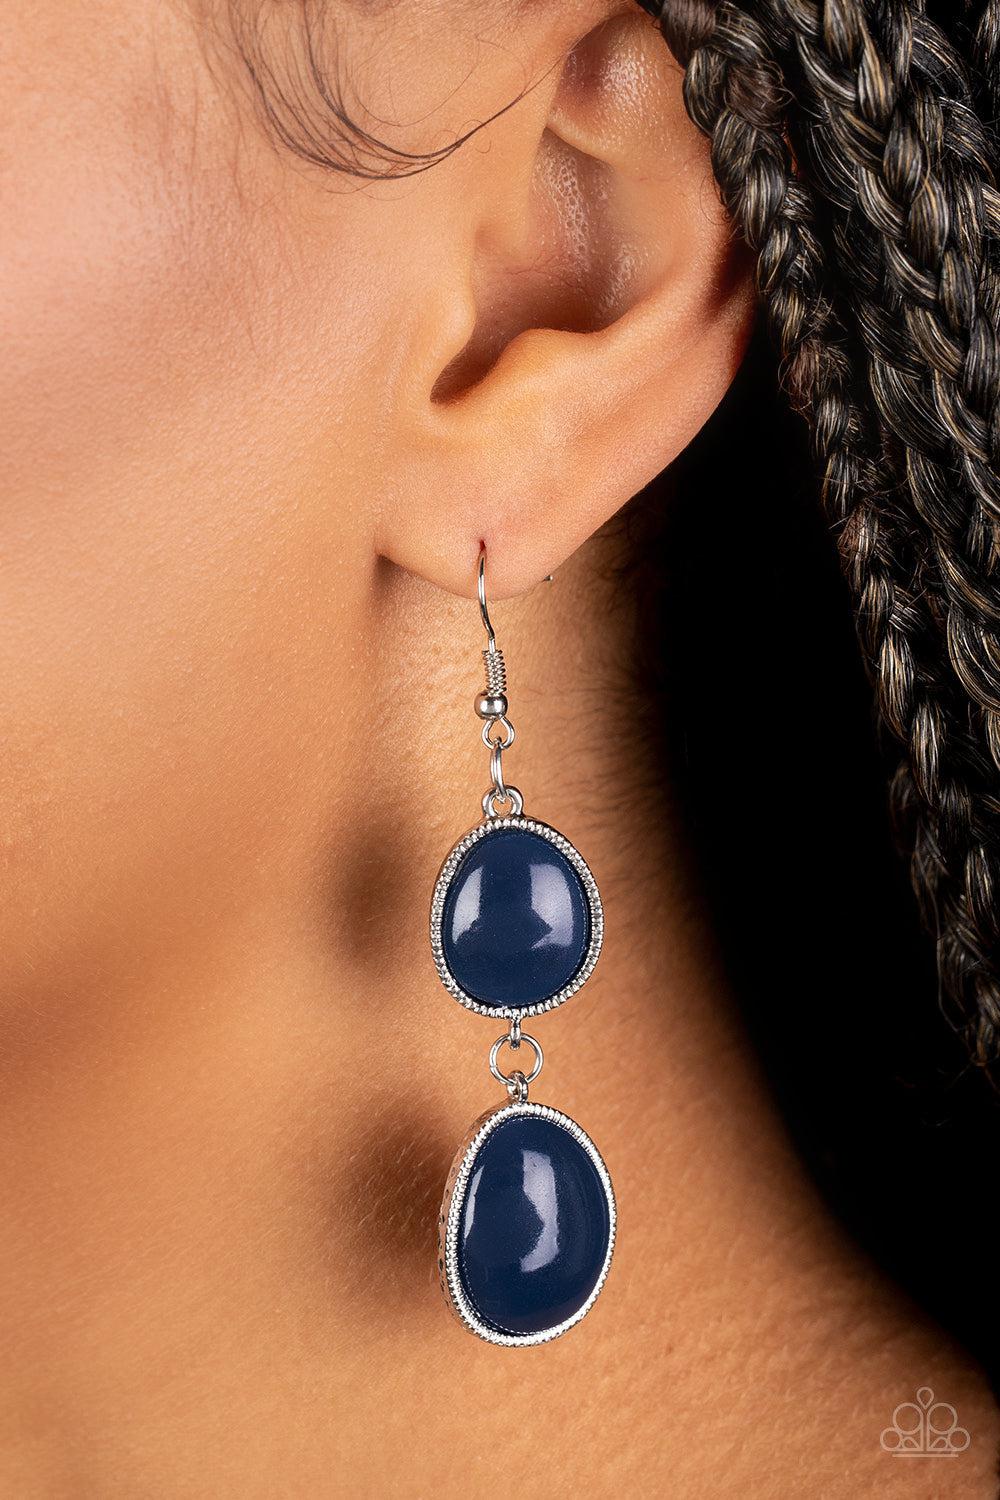 Mediterranean Myth Navy Blue Earrings - Paparazzi Accessories-on model - CarasShop.com - $5 Jewelry by Cara Jewels